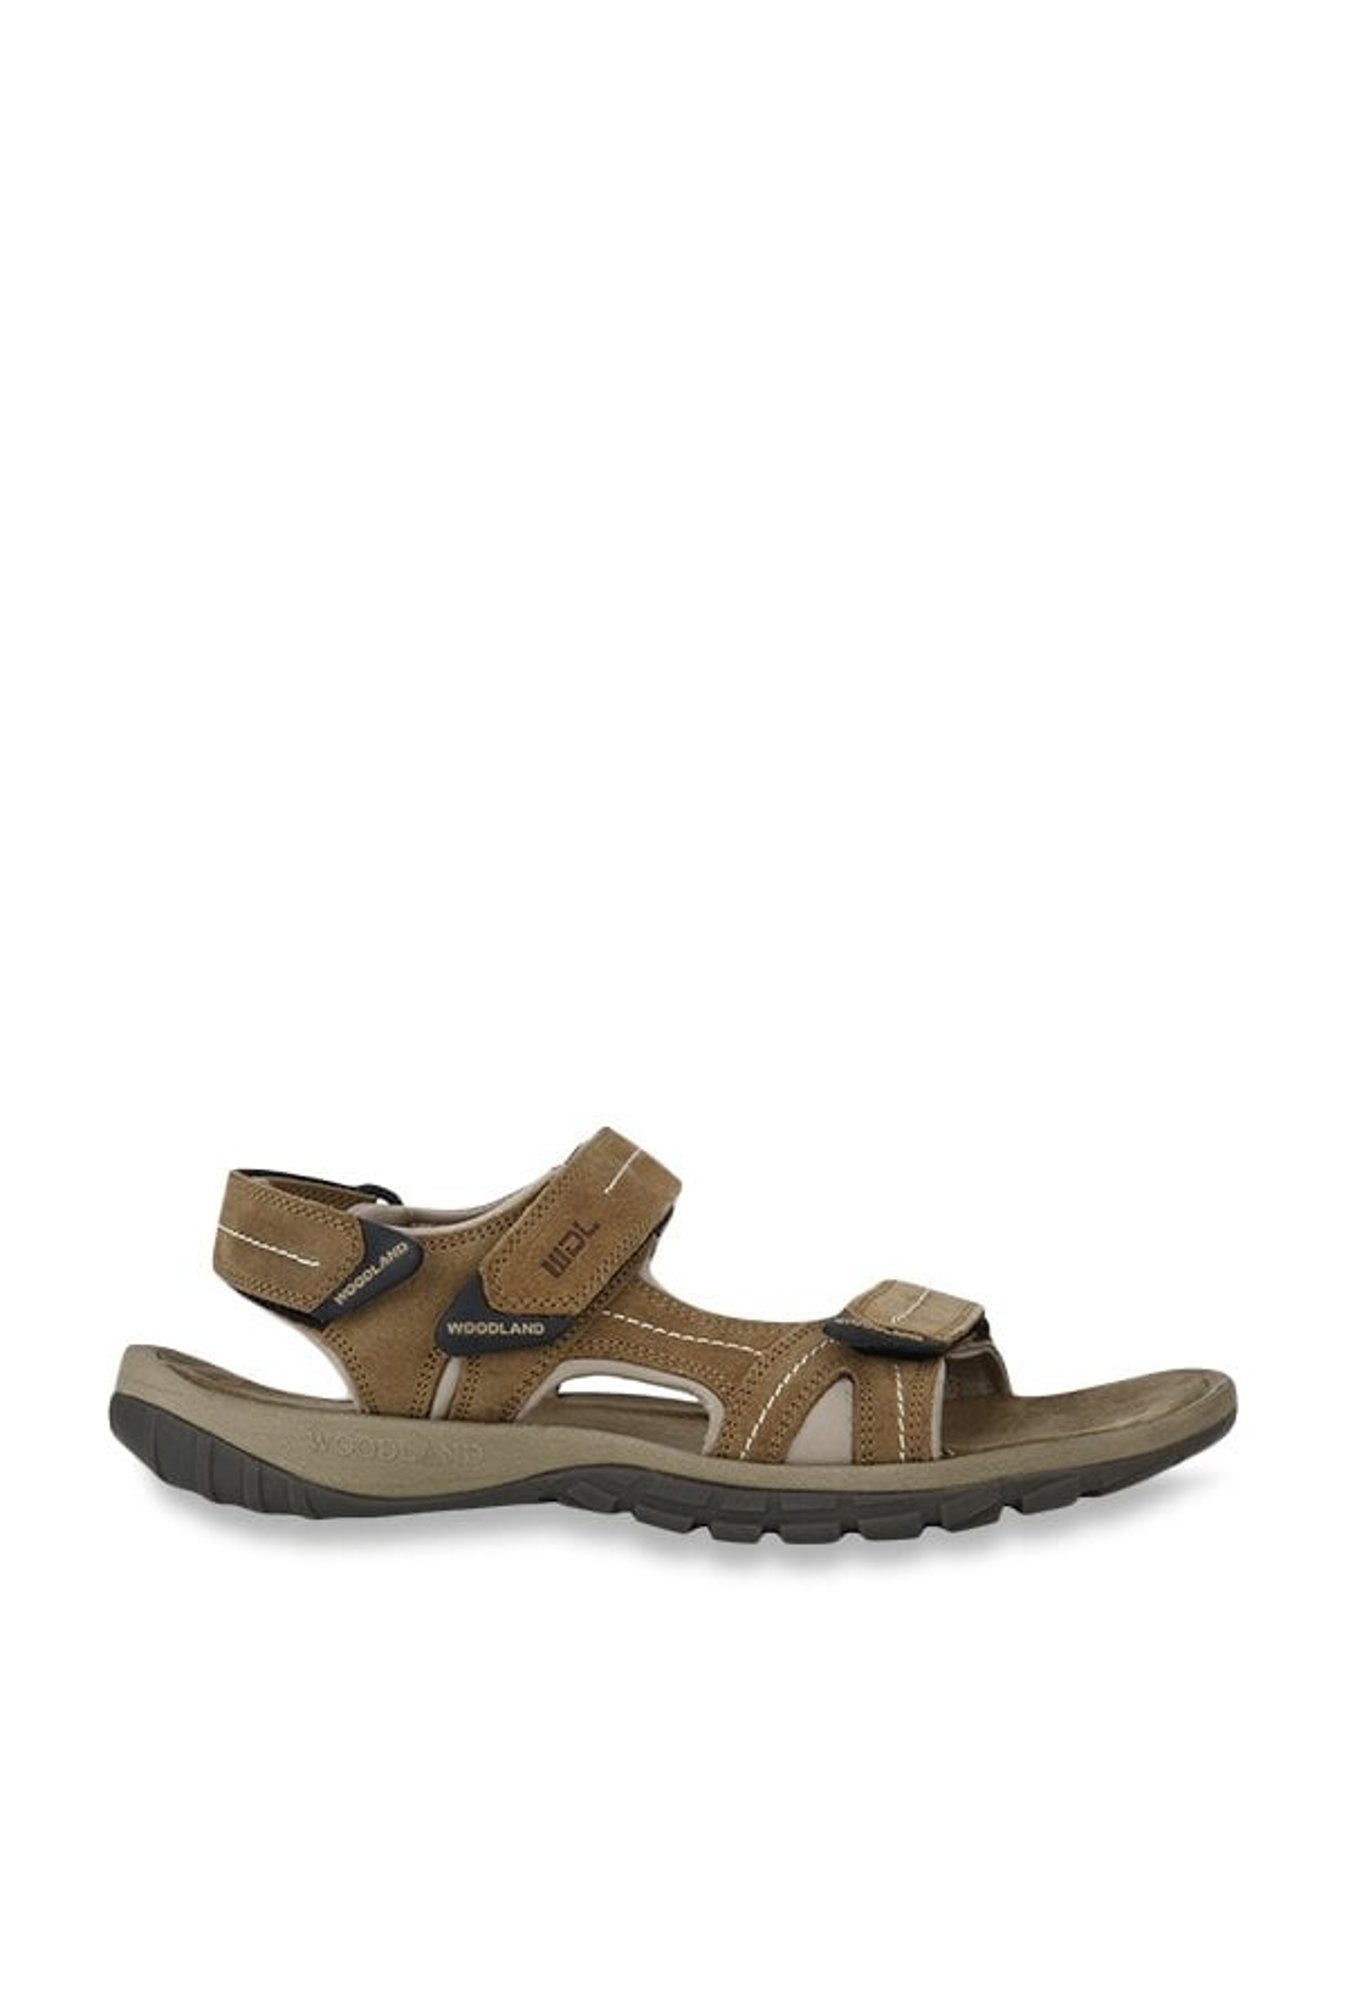 Woodland Sandals- GS 4011Y15 (42, Camel): Buy Online at Best Price in UAE -  Amazon.ae